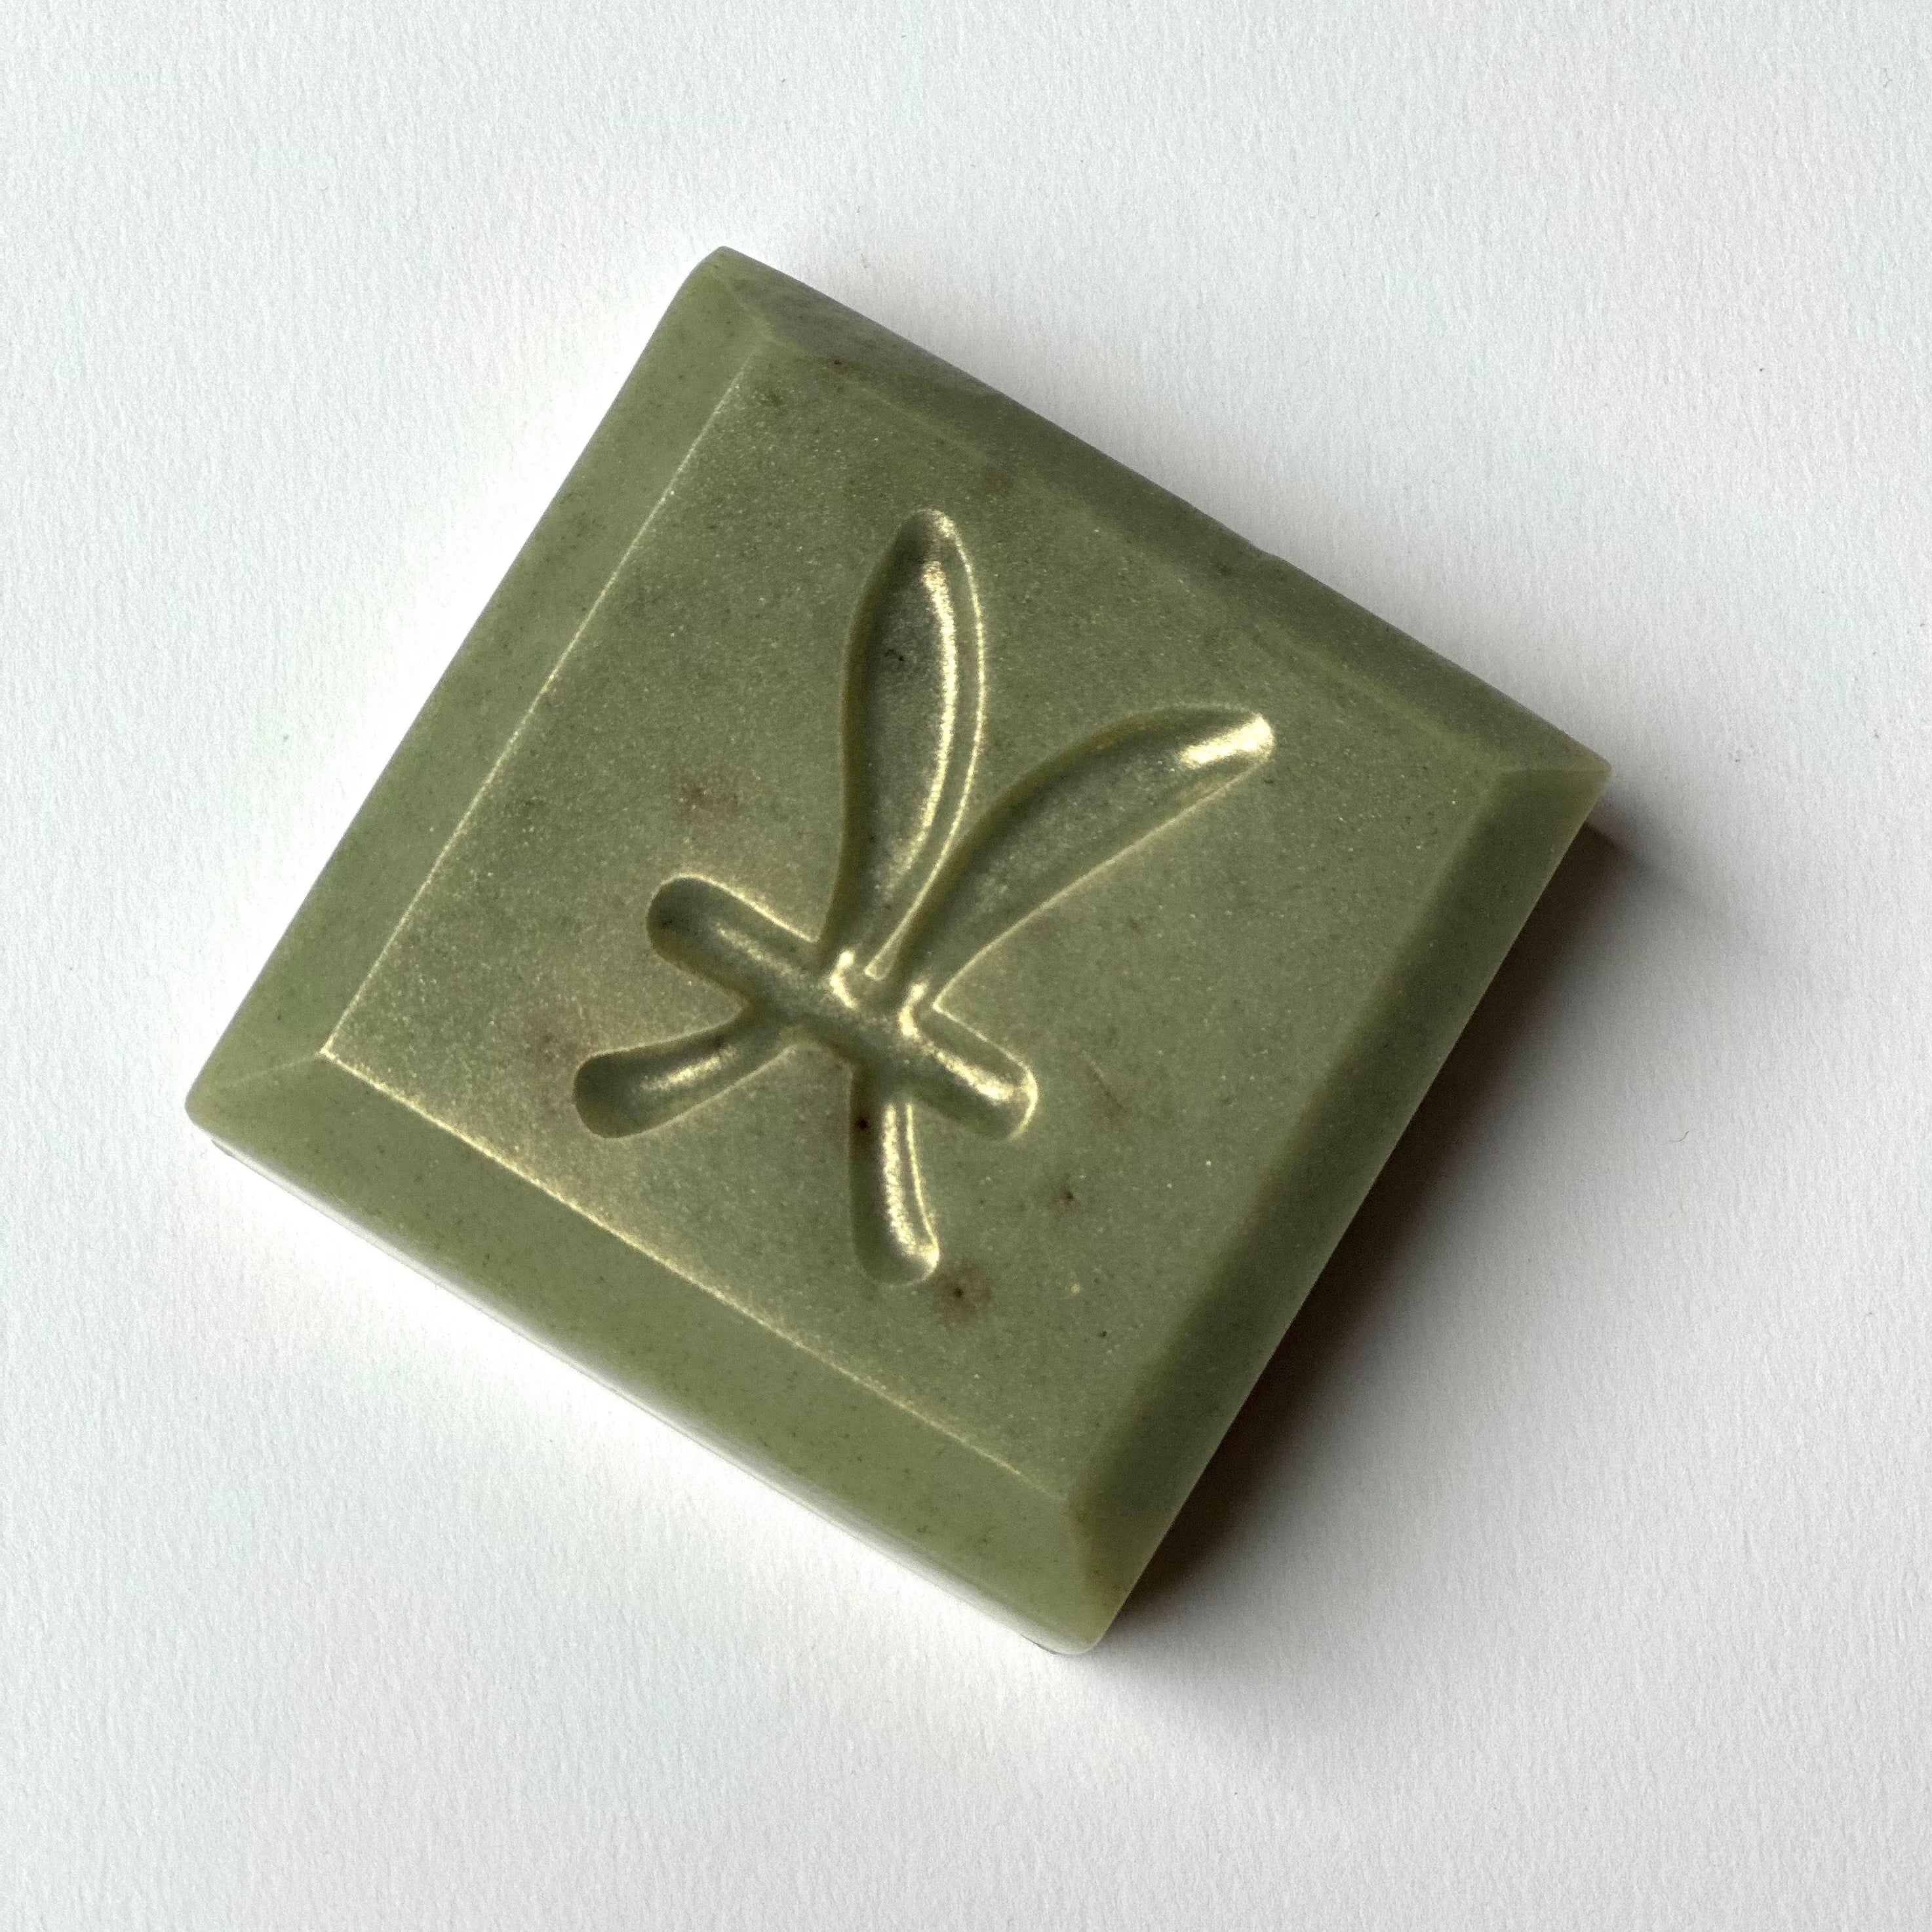 Green square with beveled edge soap bar